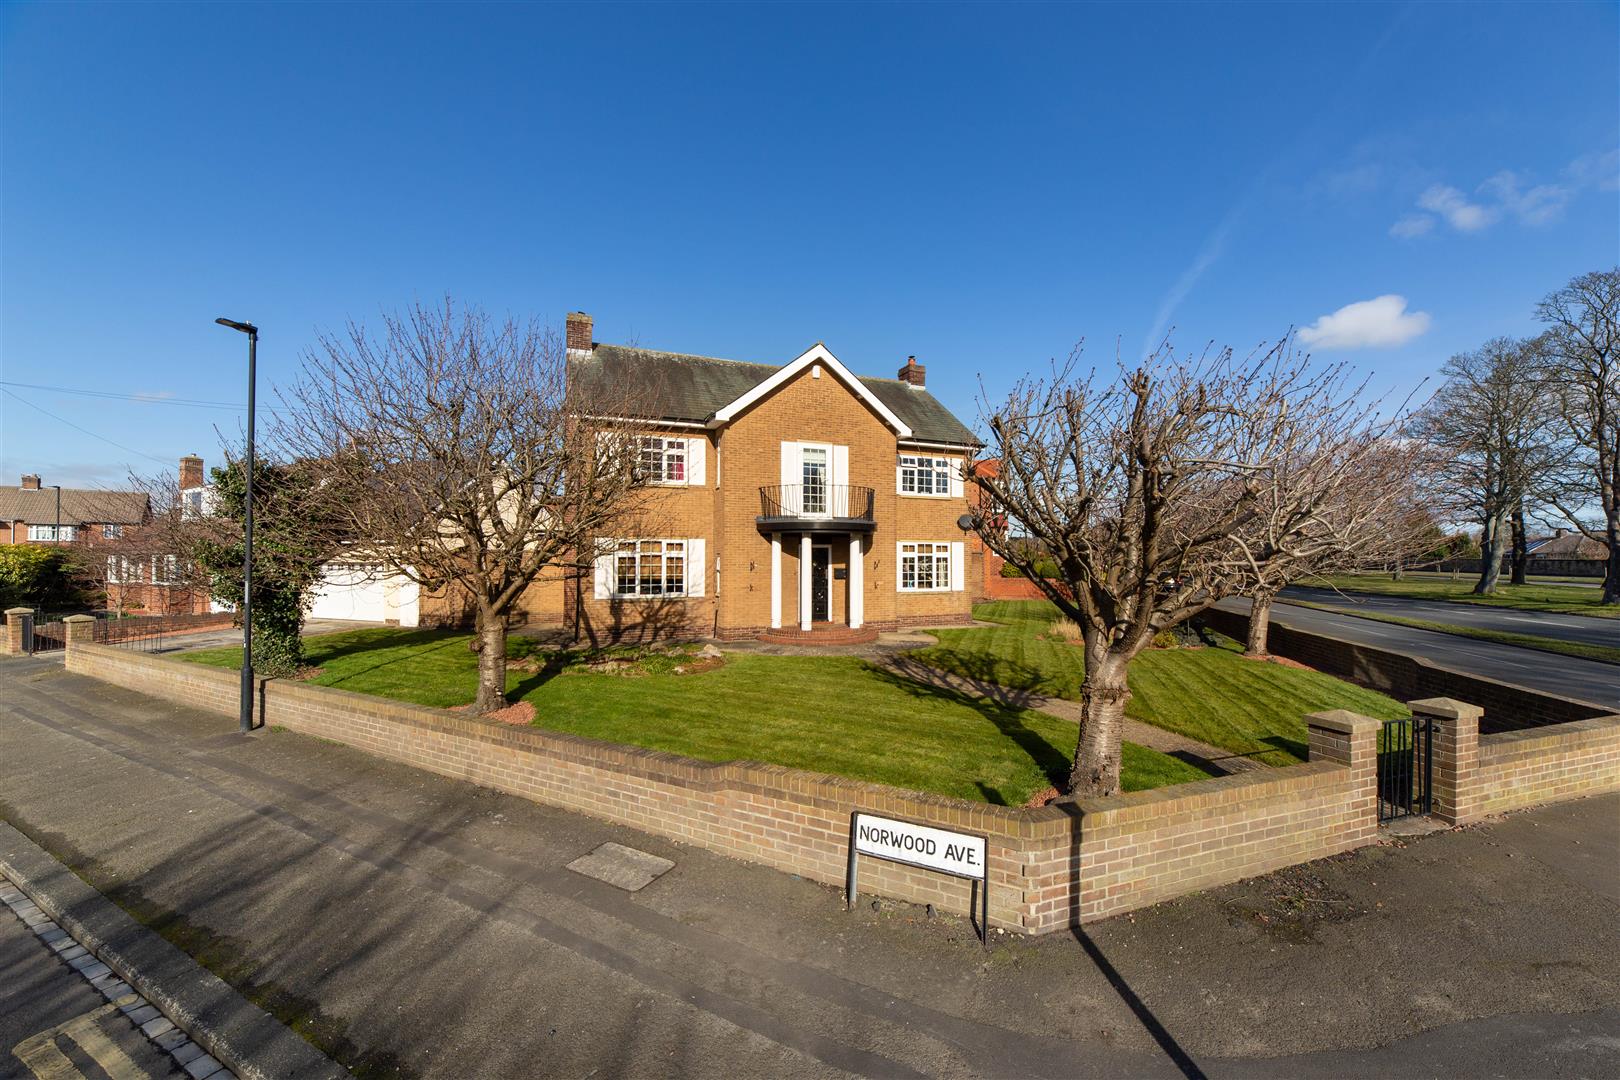 4 bed detached house for sale in Norwood Avenue, Gosforth - Property Image 1